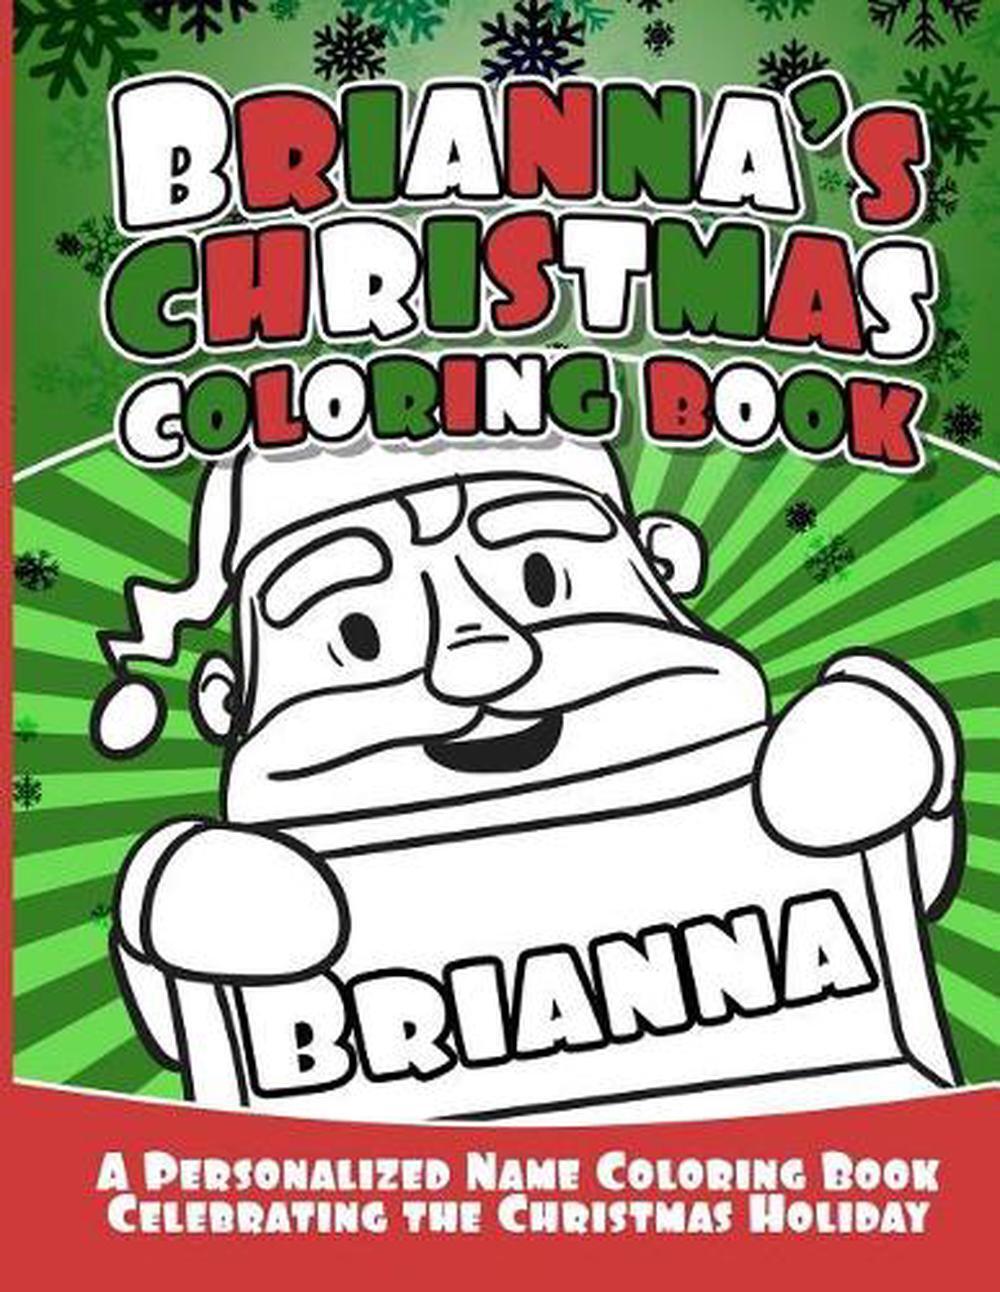 Briannas christmas coloring book a personalized name coloring book celebrating